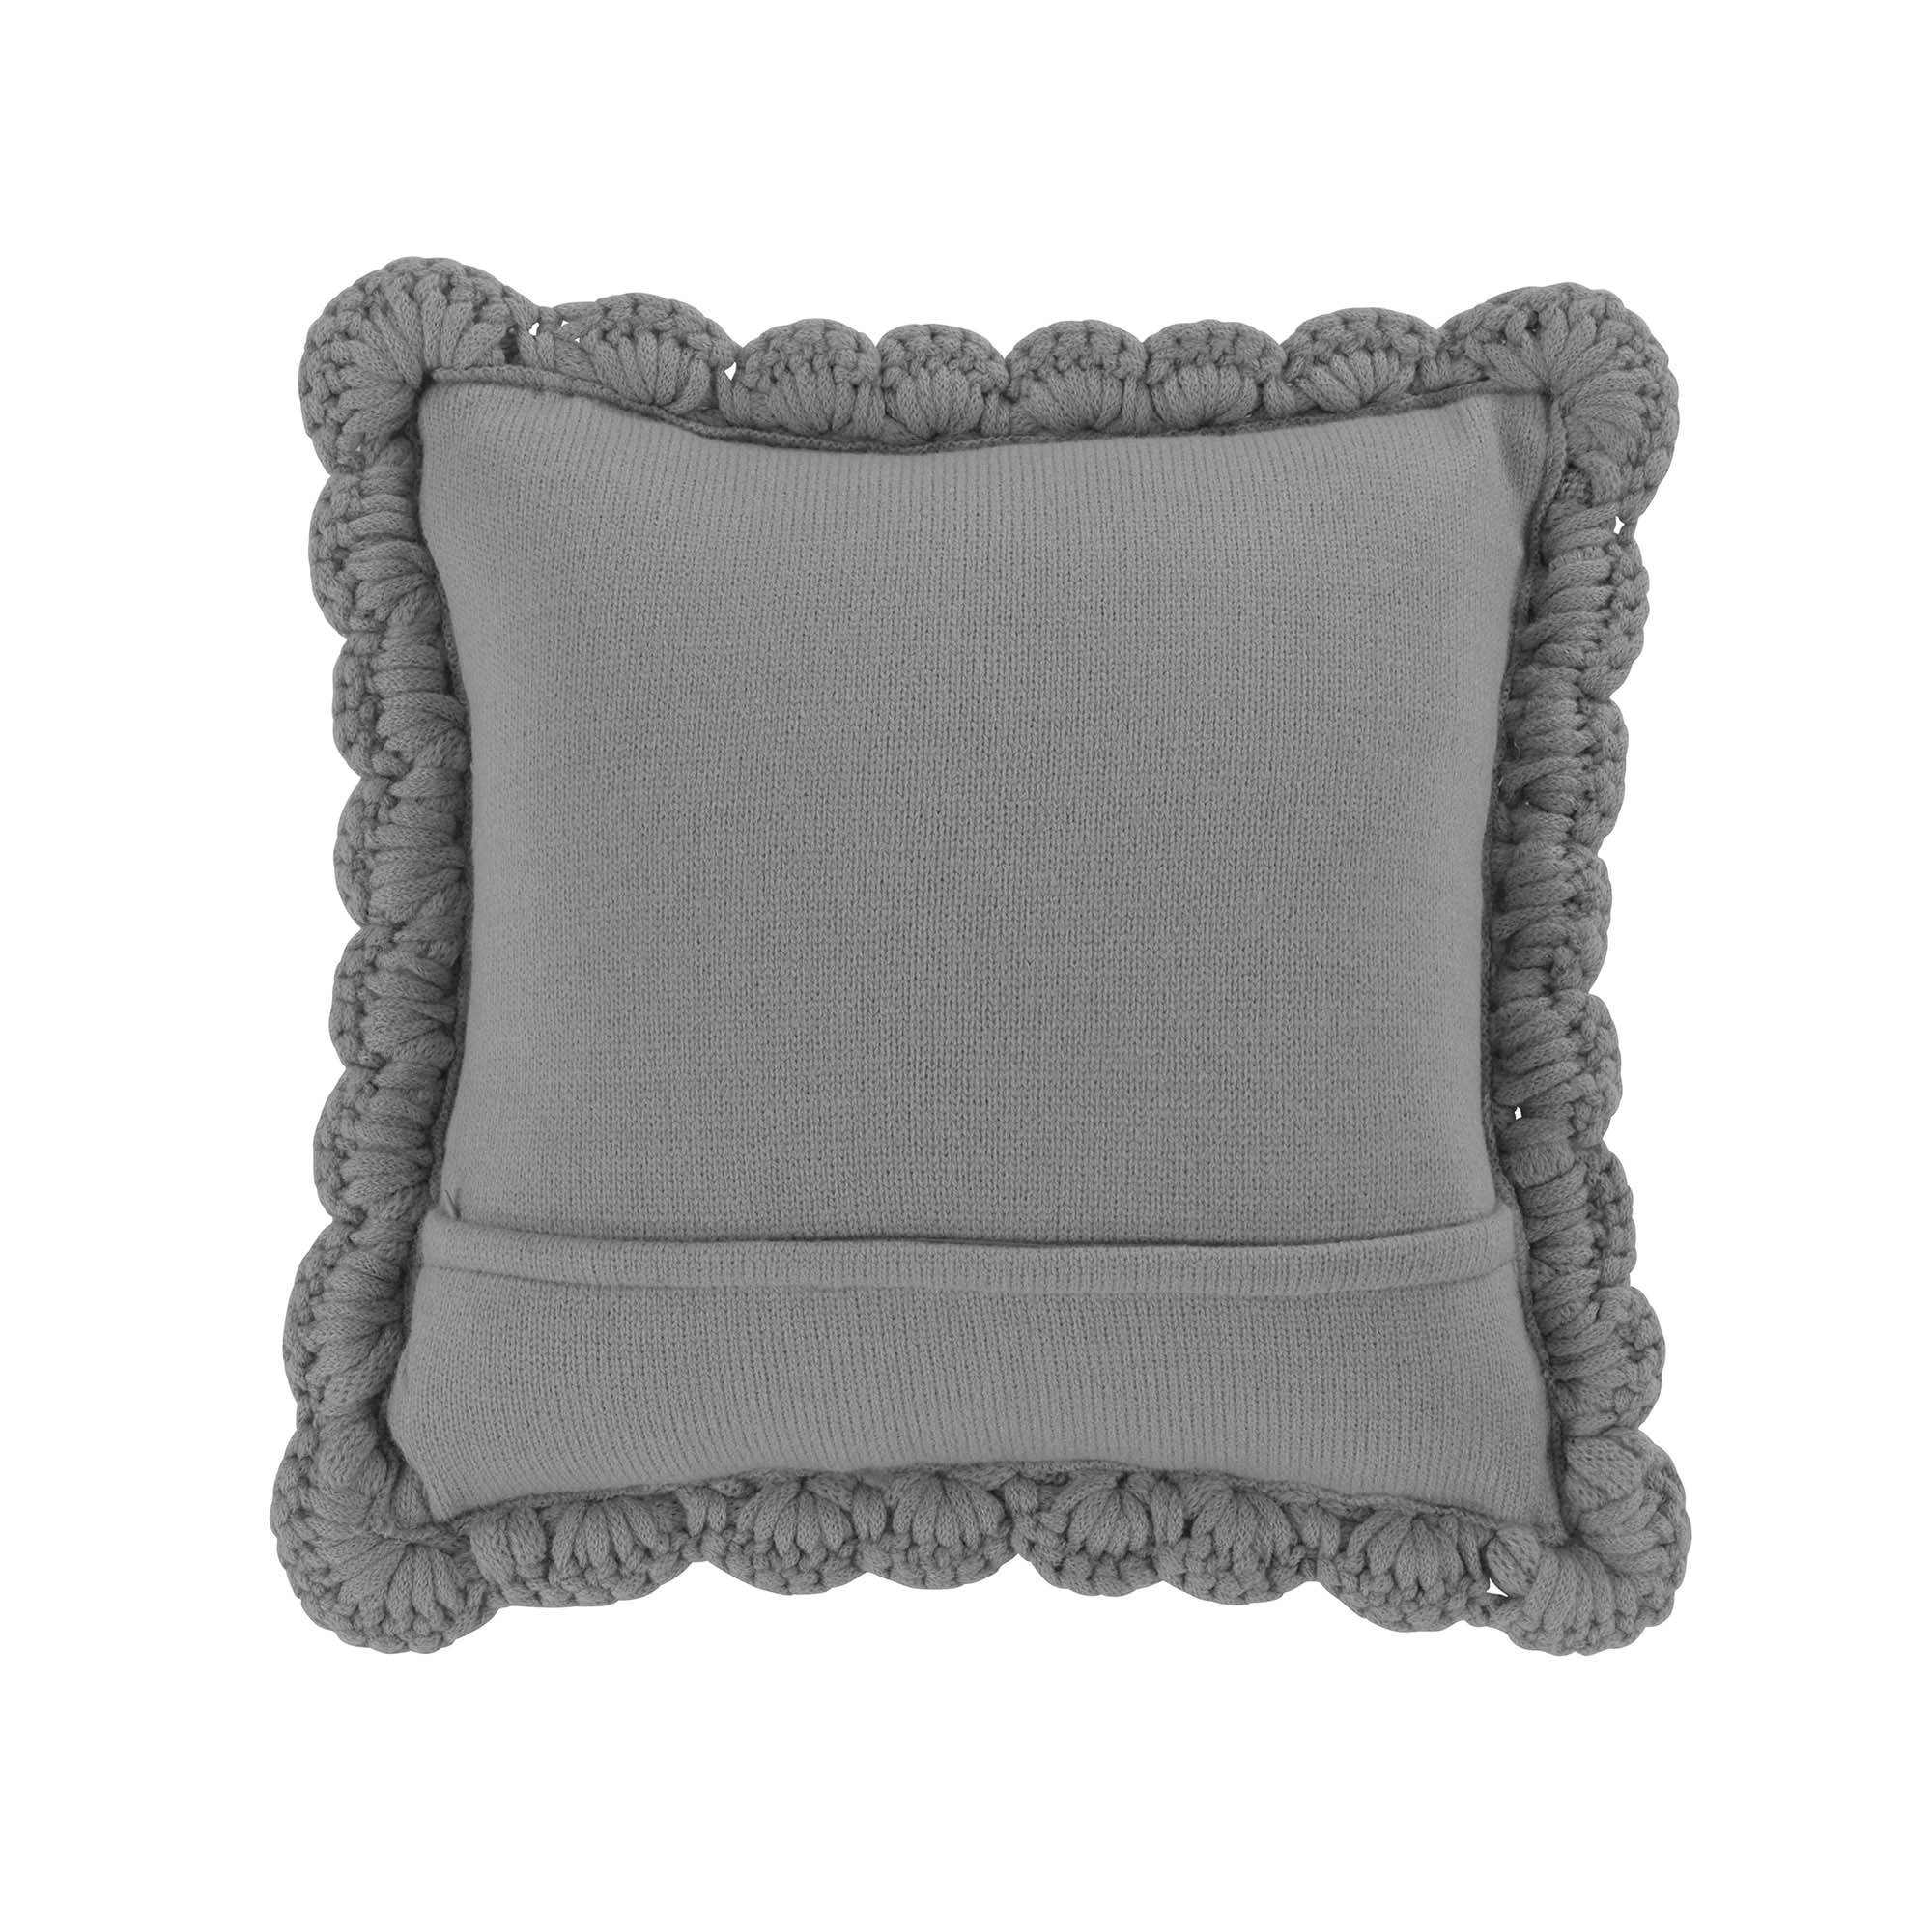 Chunky Knitted Grey Decorative Pillow Throw Pillows By Donna Sharp